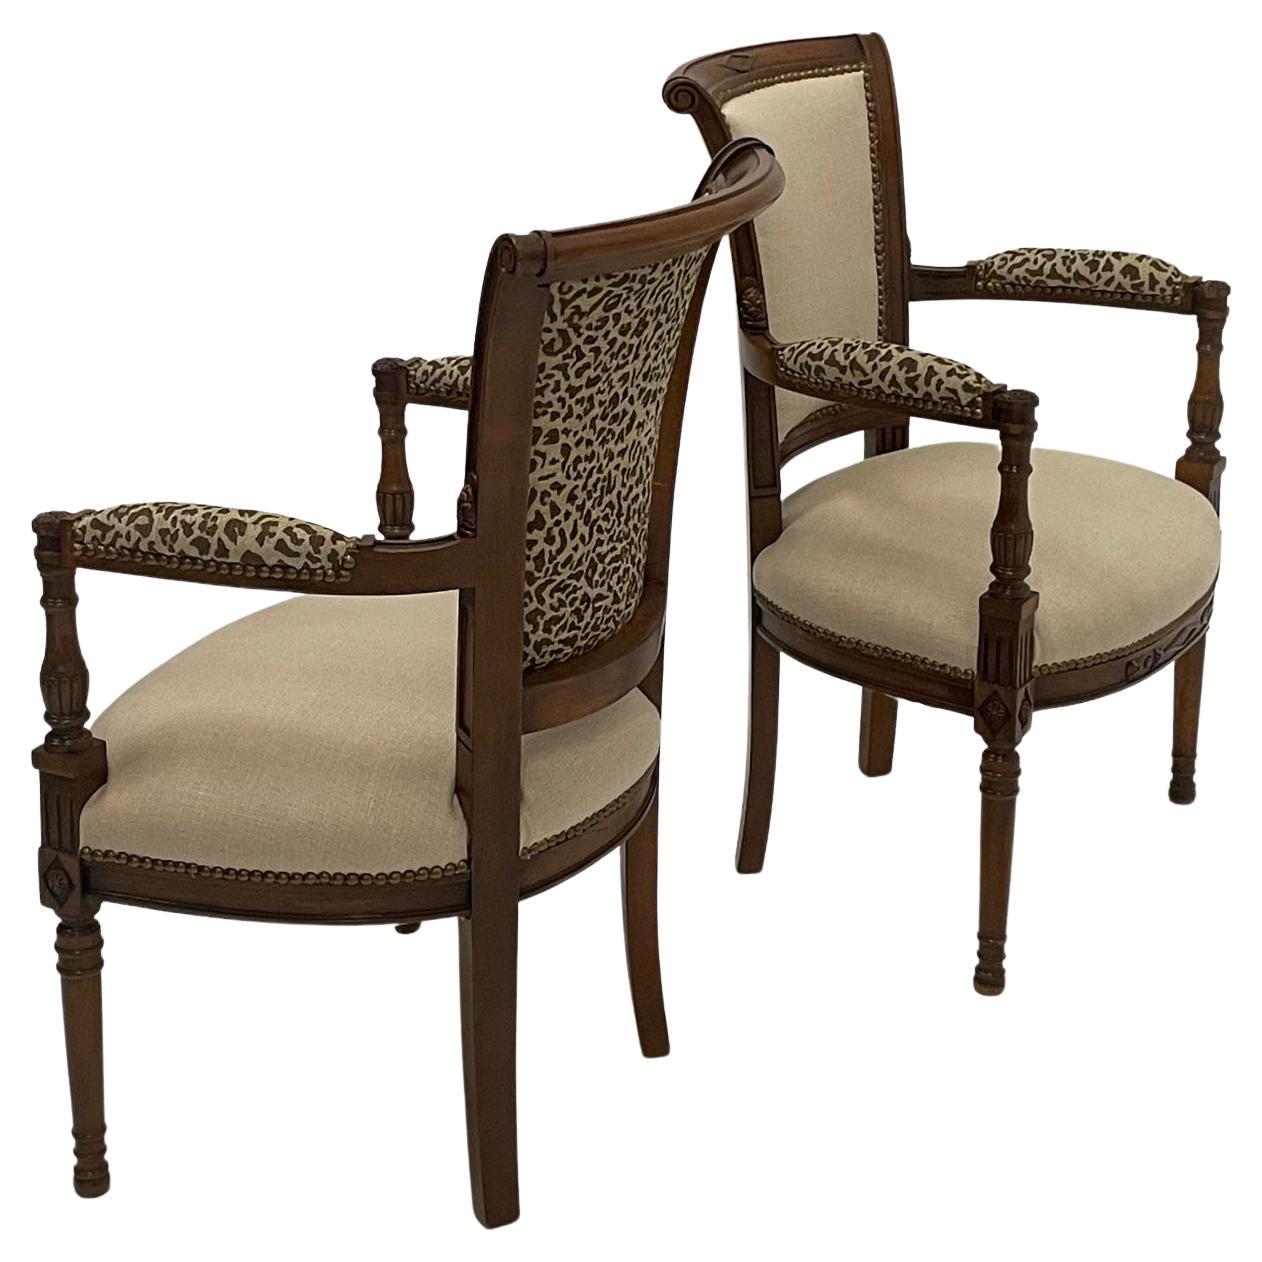 Superbly Stylish Pair of Carved Walnut Armchairs Upholstered in Linen & Leopard For Sale